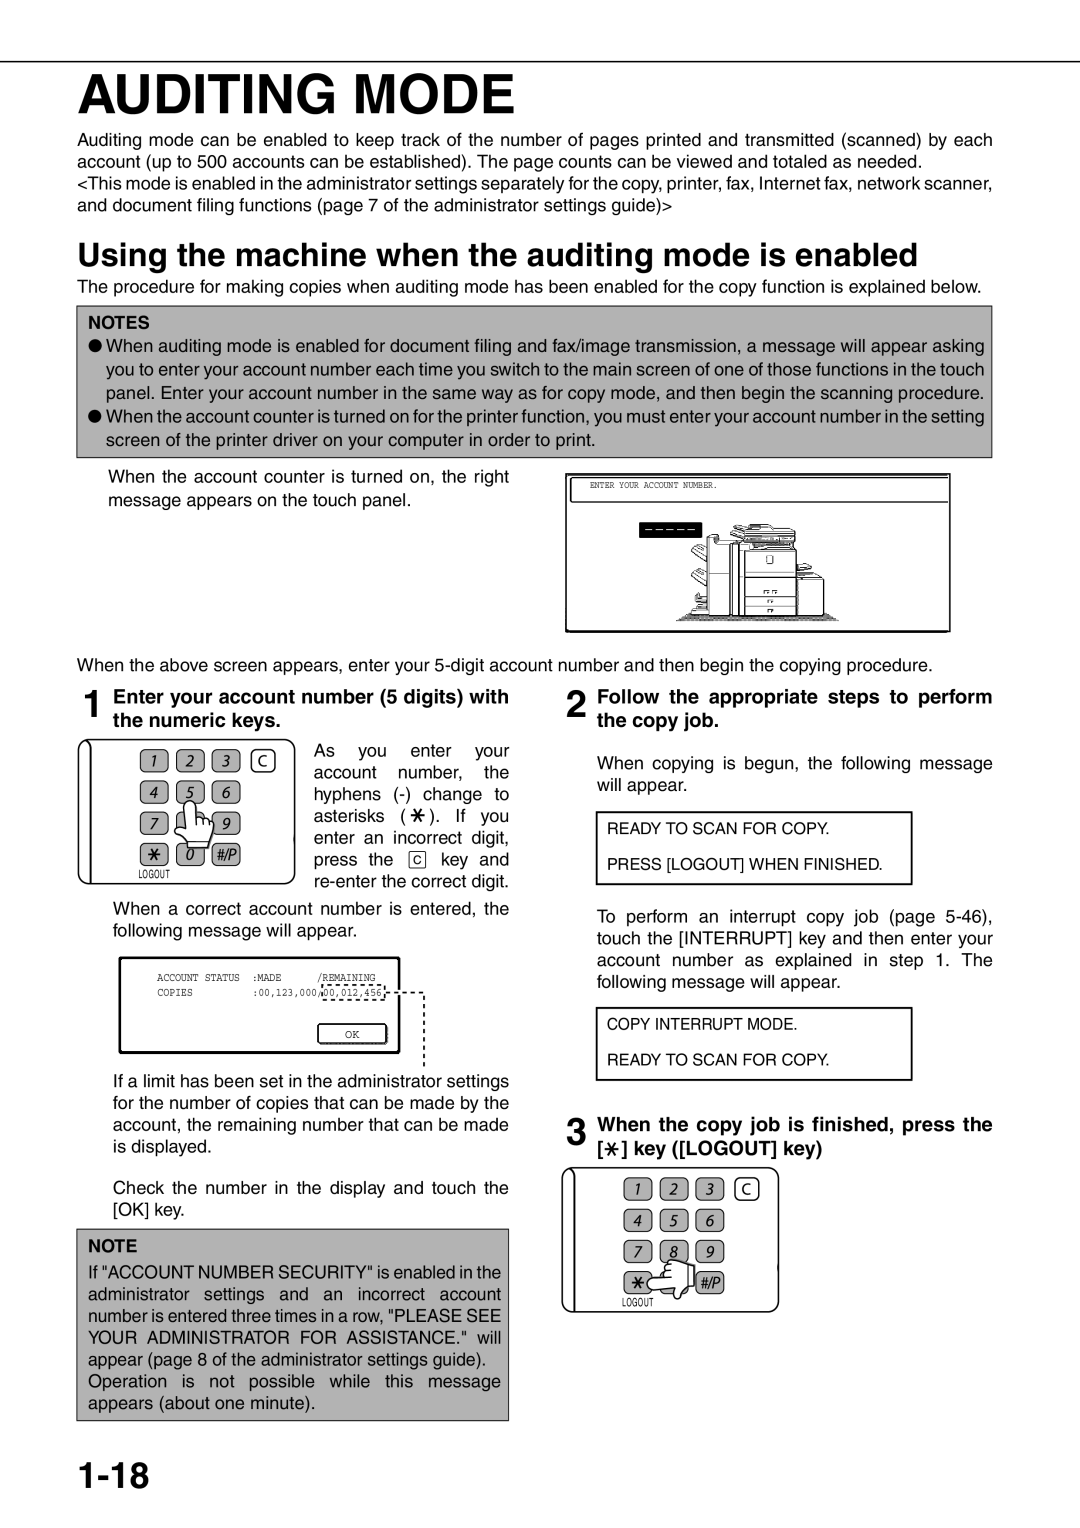 Sharp MX-M700N, MX-M550U, MX-M620N, MX-M700U Auditing Mode, 1-18, Using the machine when the auditing mode is enabled 